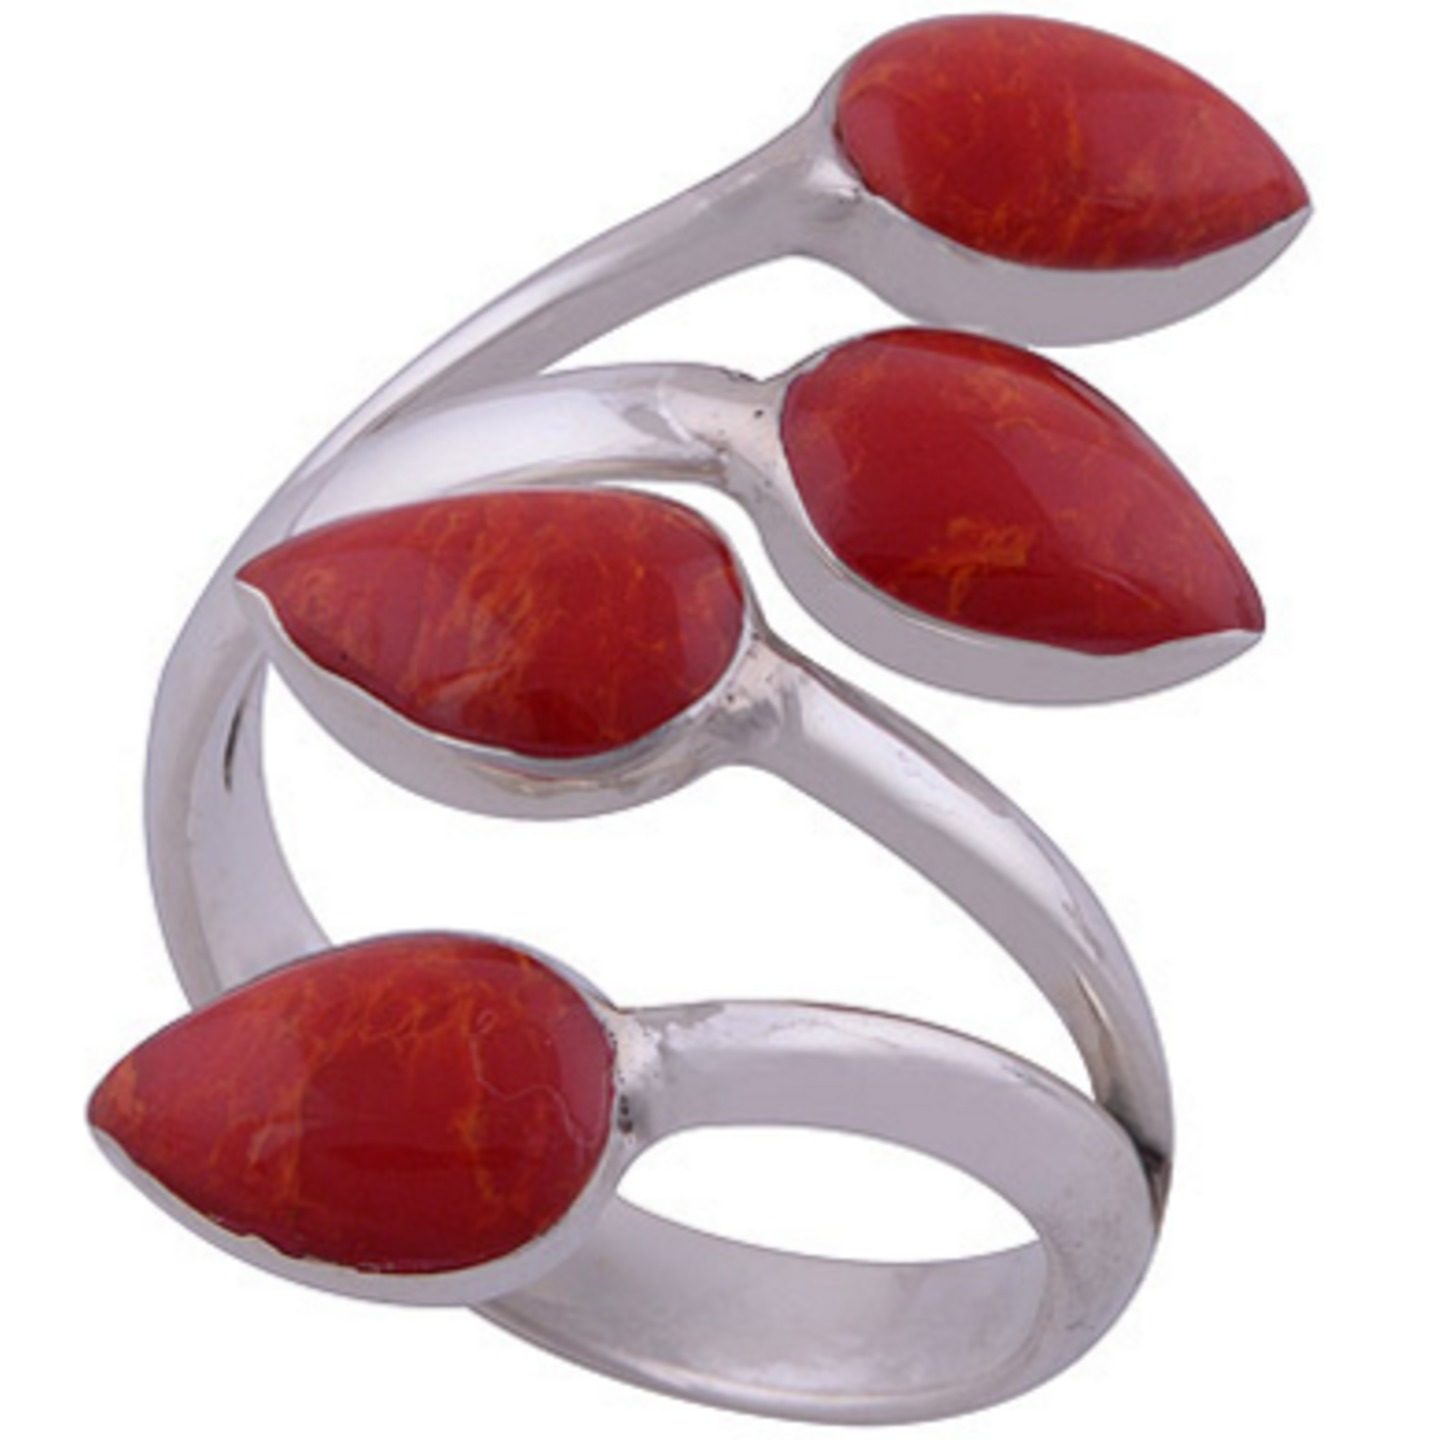 The Coral Bud Silver Ring